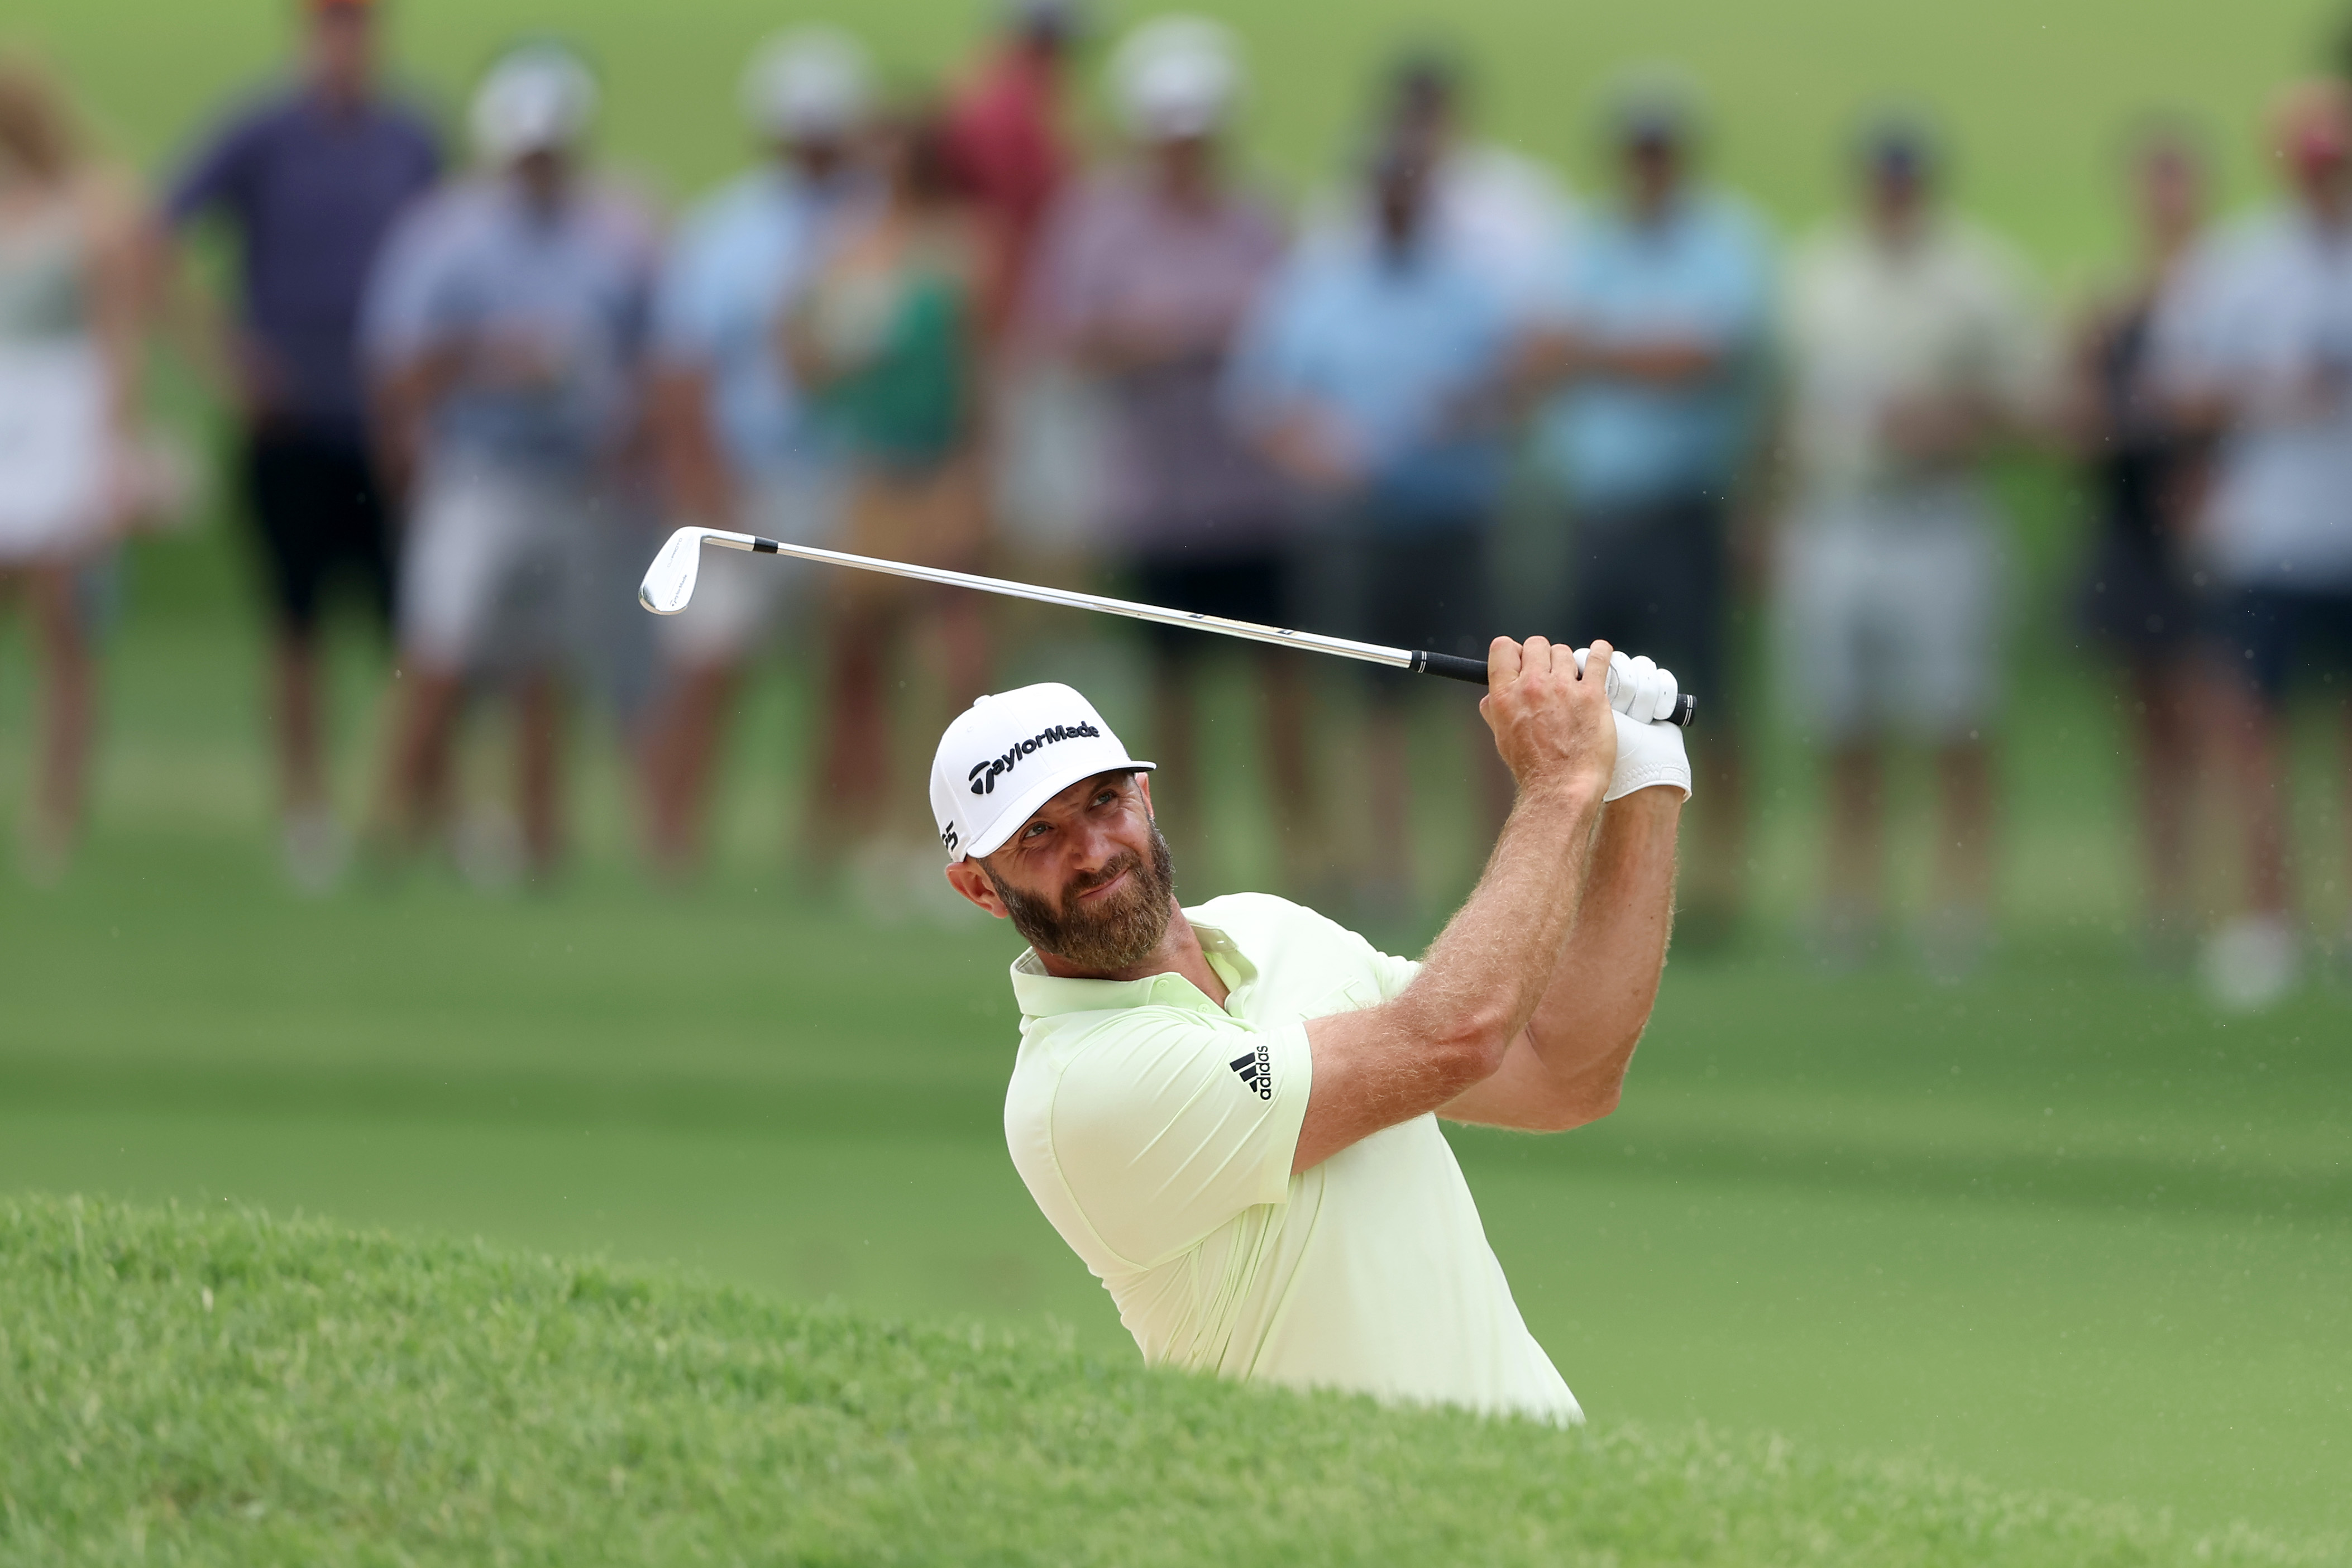 Dustin Johnson of the United States plays a shot from a bunker on the ninth hole during the second round of the 2022 PGA Championship at Southern Hills Country Club on May 20, 2022 in Tulsa, Oklahoma.